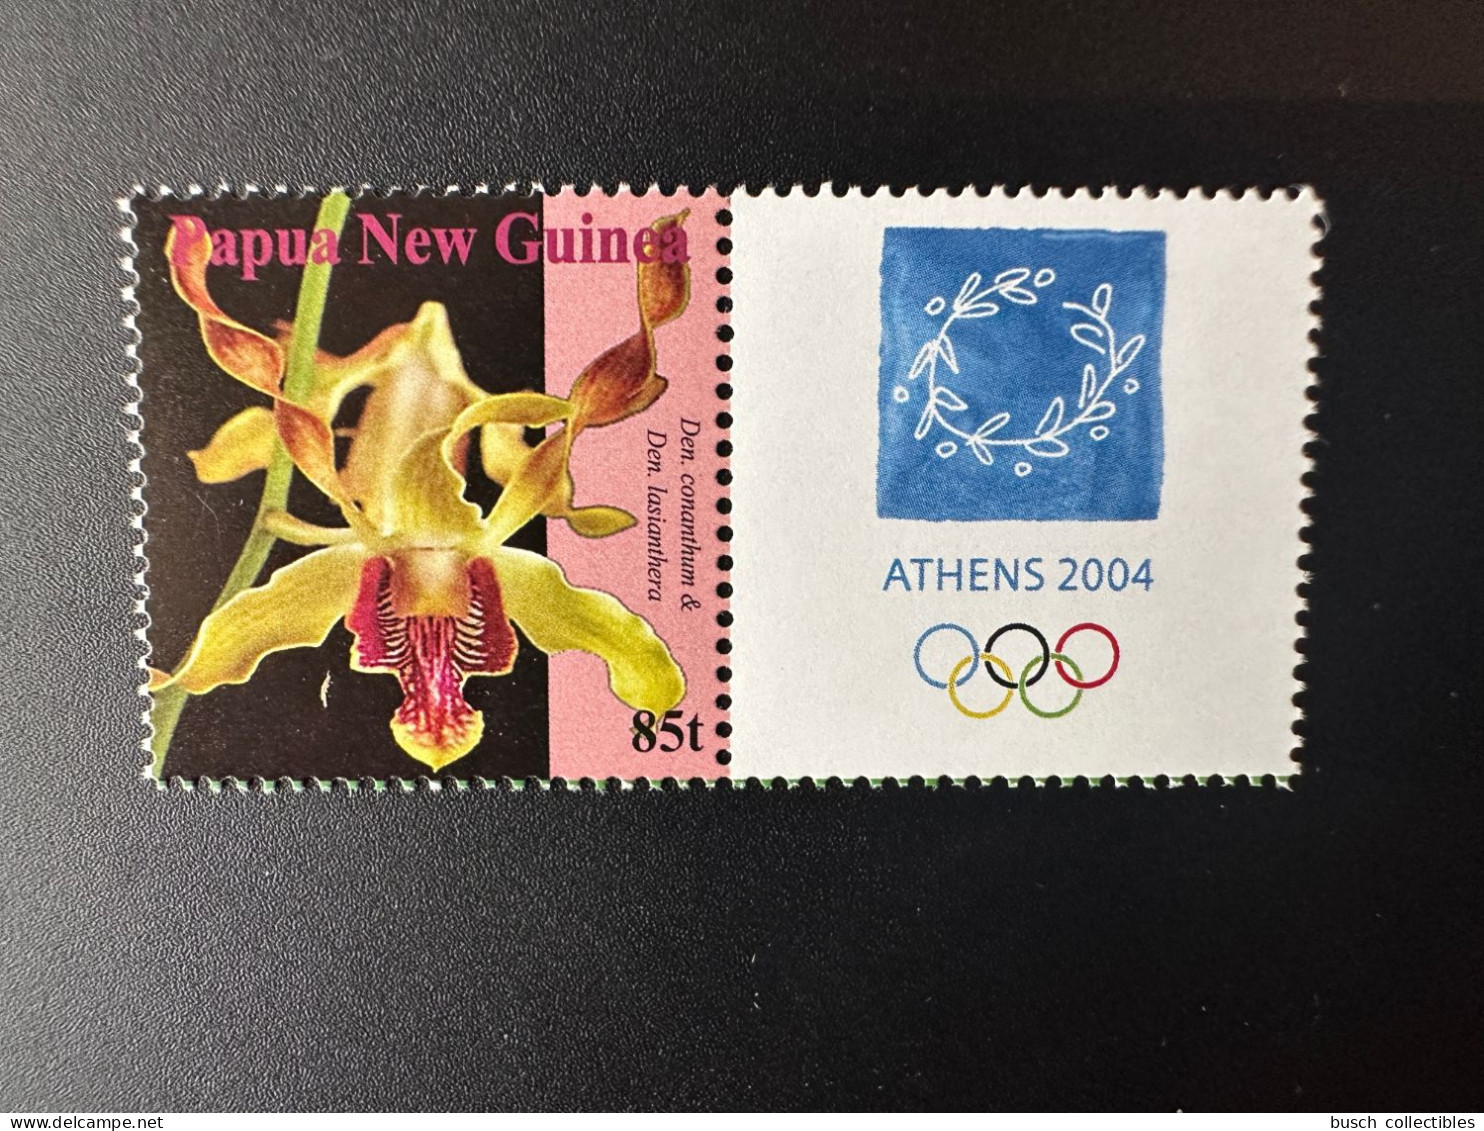 Papua New Guinea PNG 2007 Mi. 1244 Stamp Personalized Athens 2004 Olympic Games Jeux Olympiques Olympia Athen Orchids - Sommer 2004: Athen